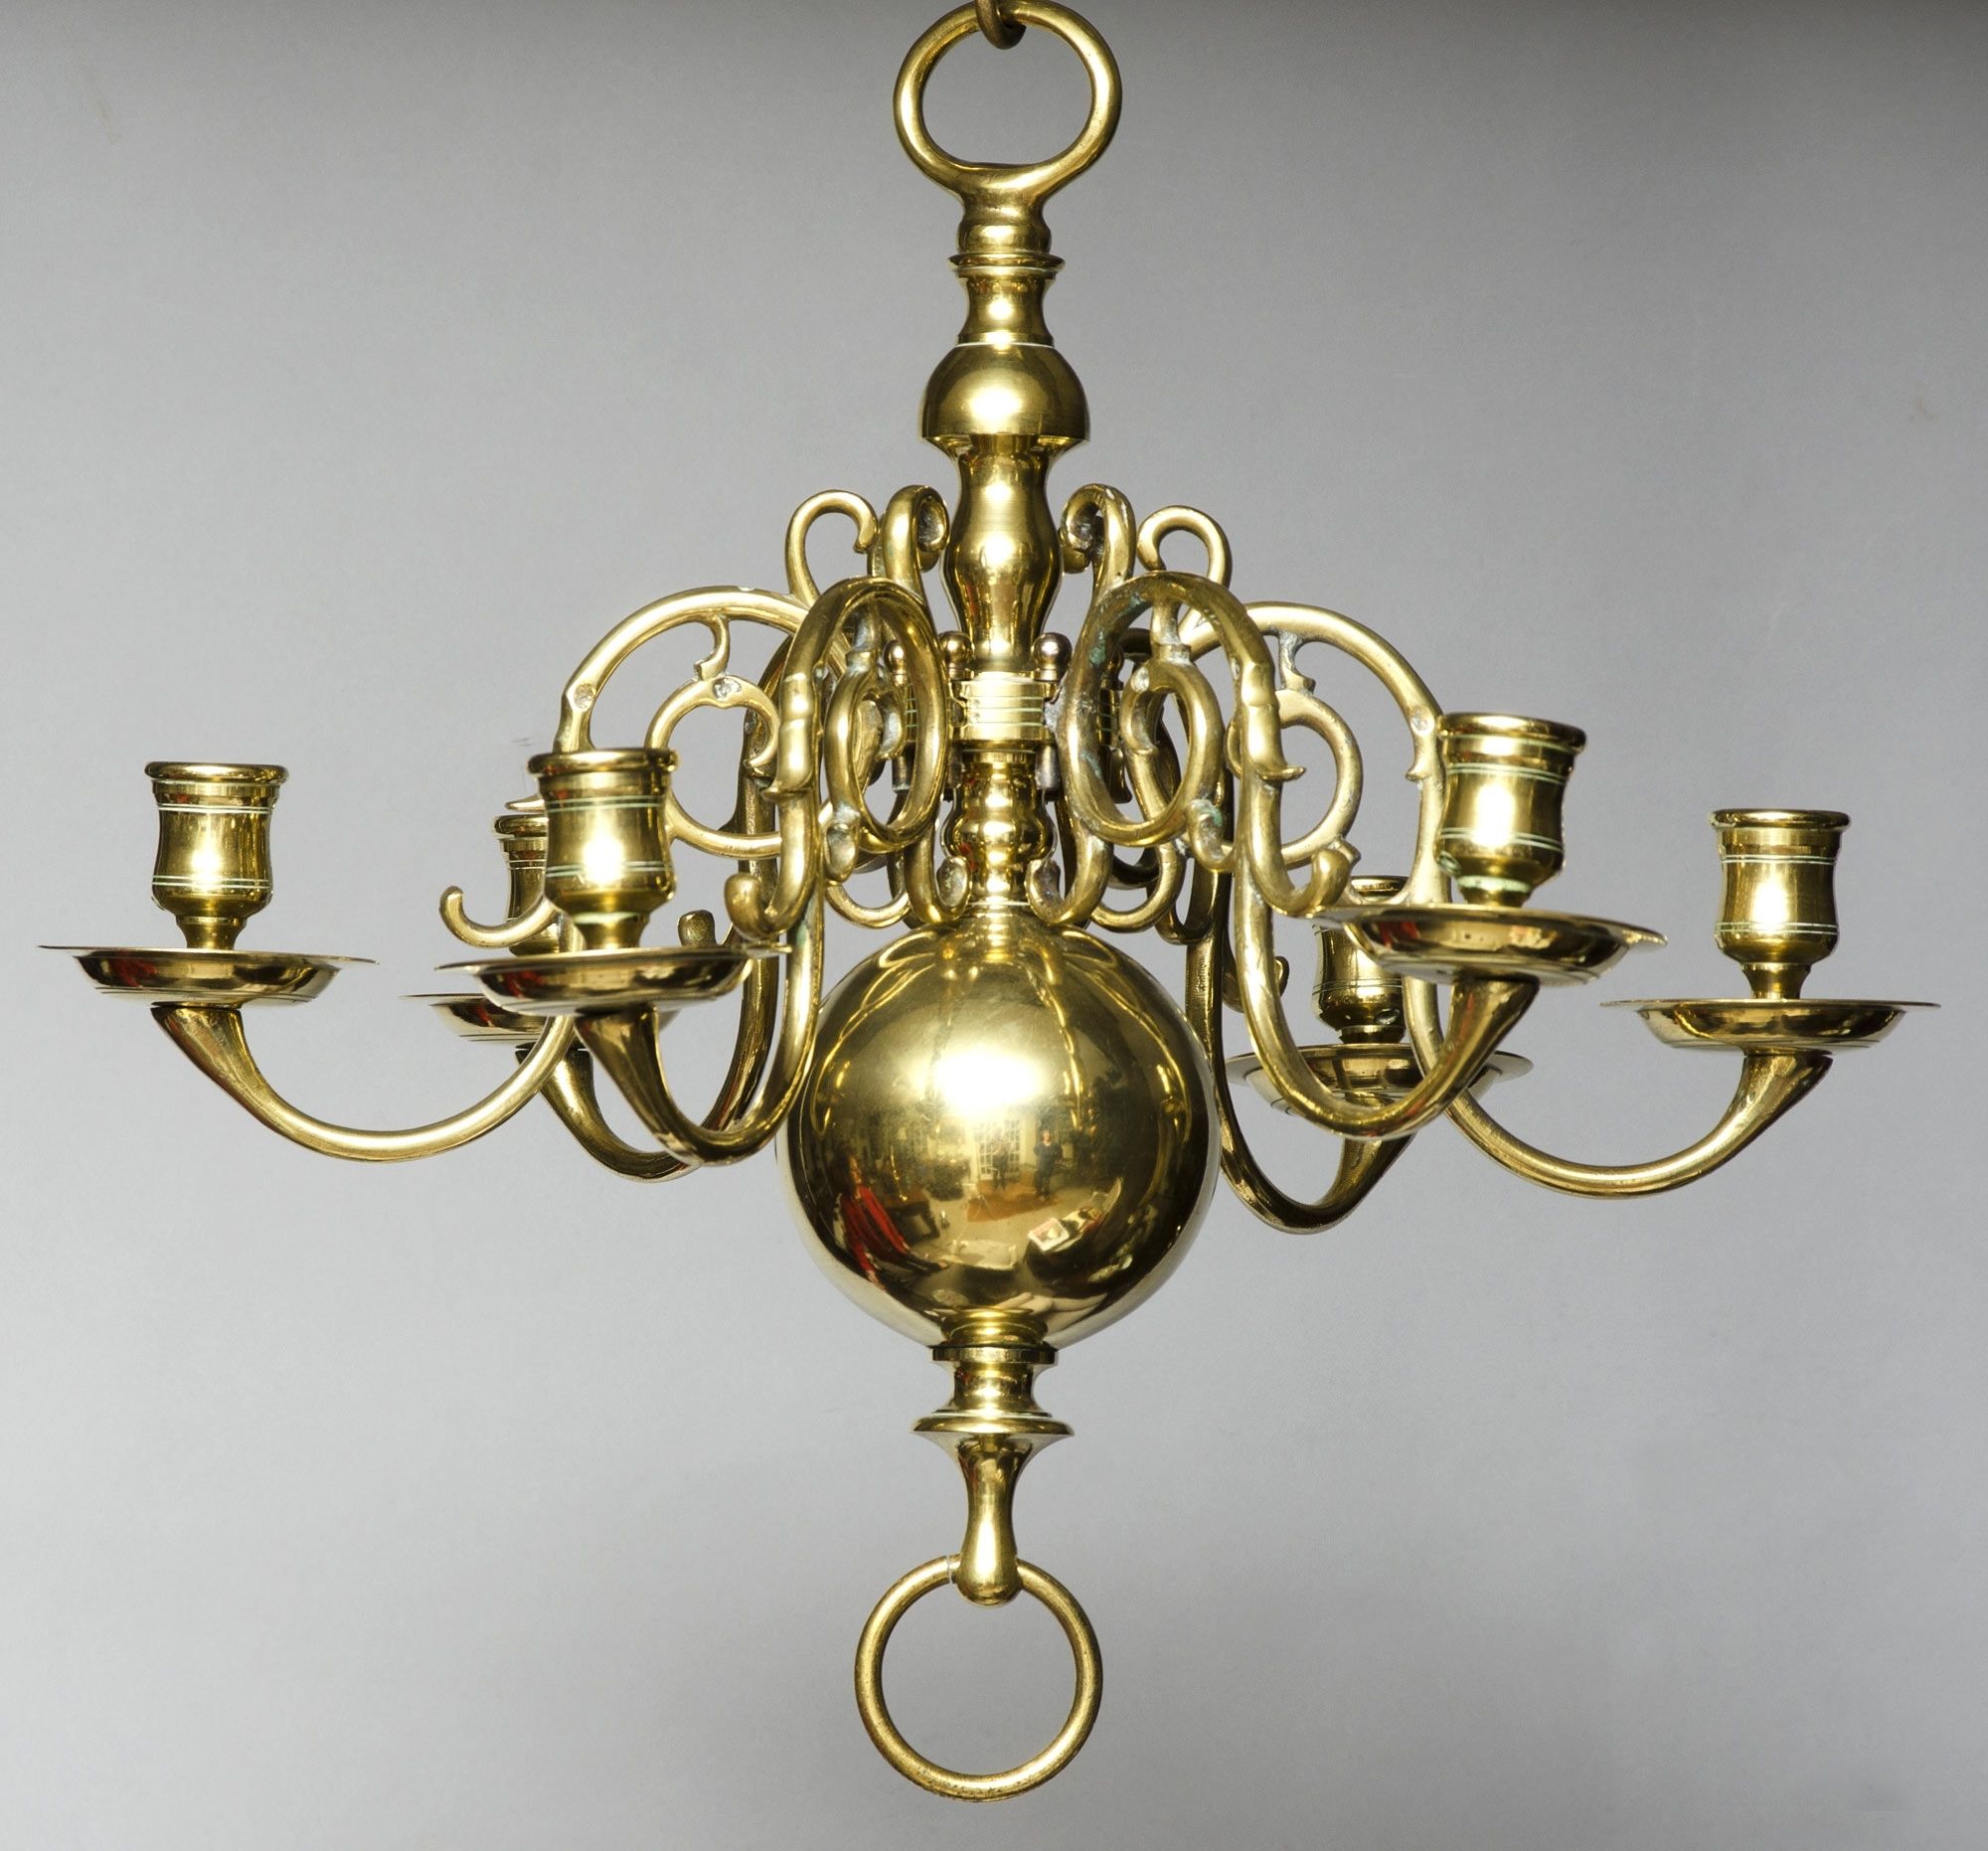 Old Brass Chandeliers In Fashionable Product » Small Dutch Brass Chandelier (View 3 of 20)